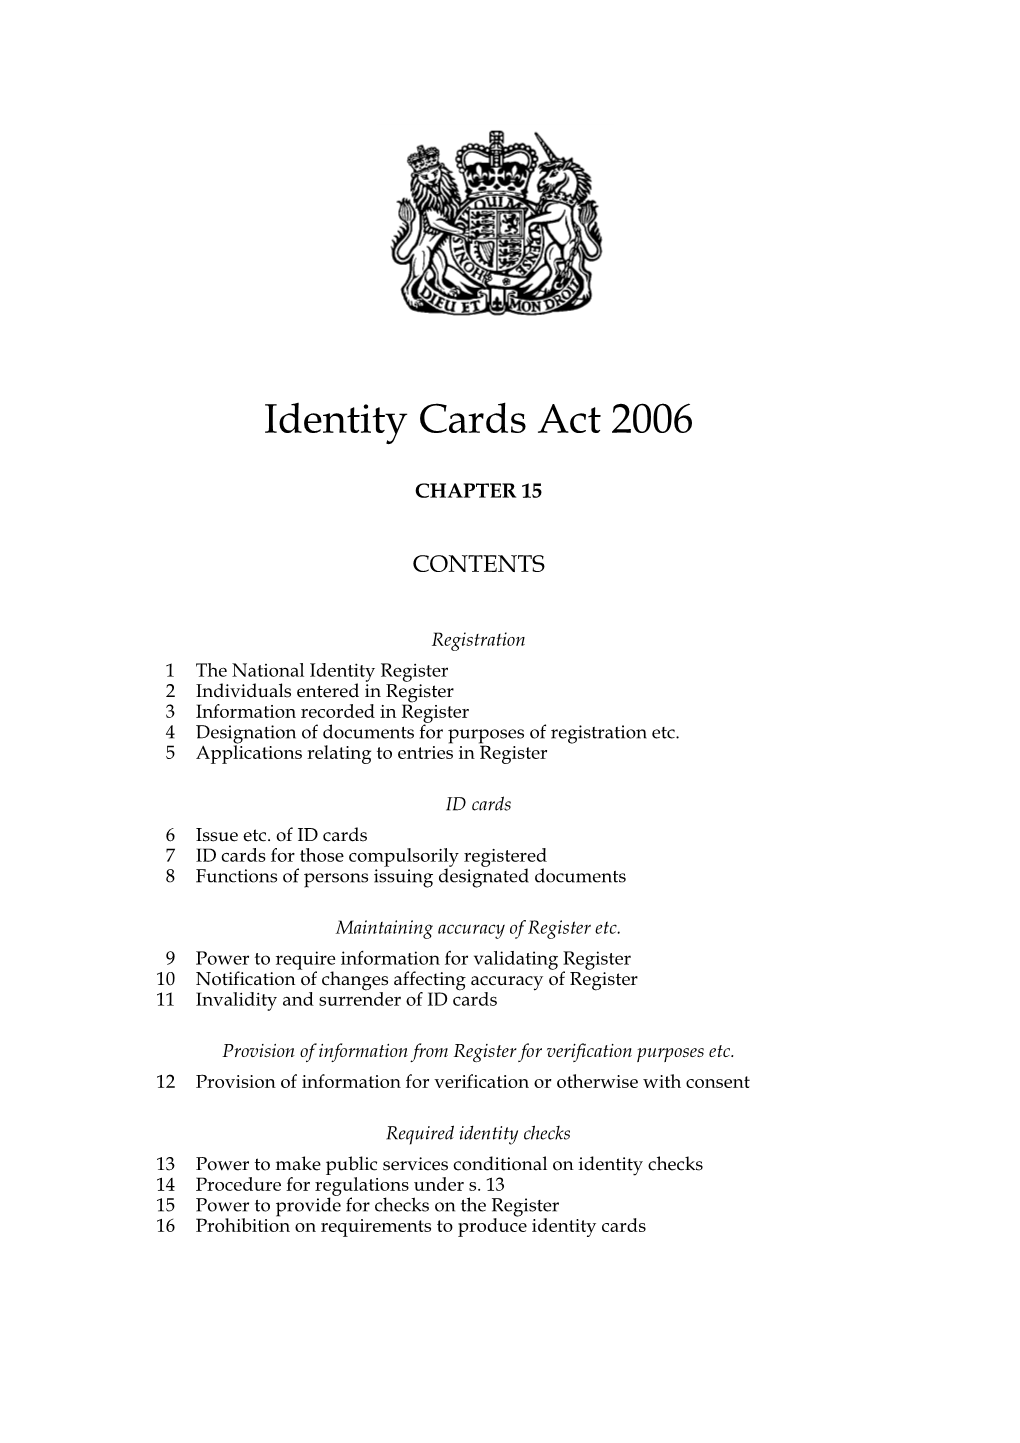 Identity Cards Act 2006